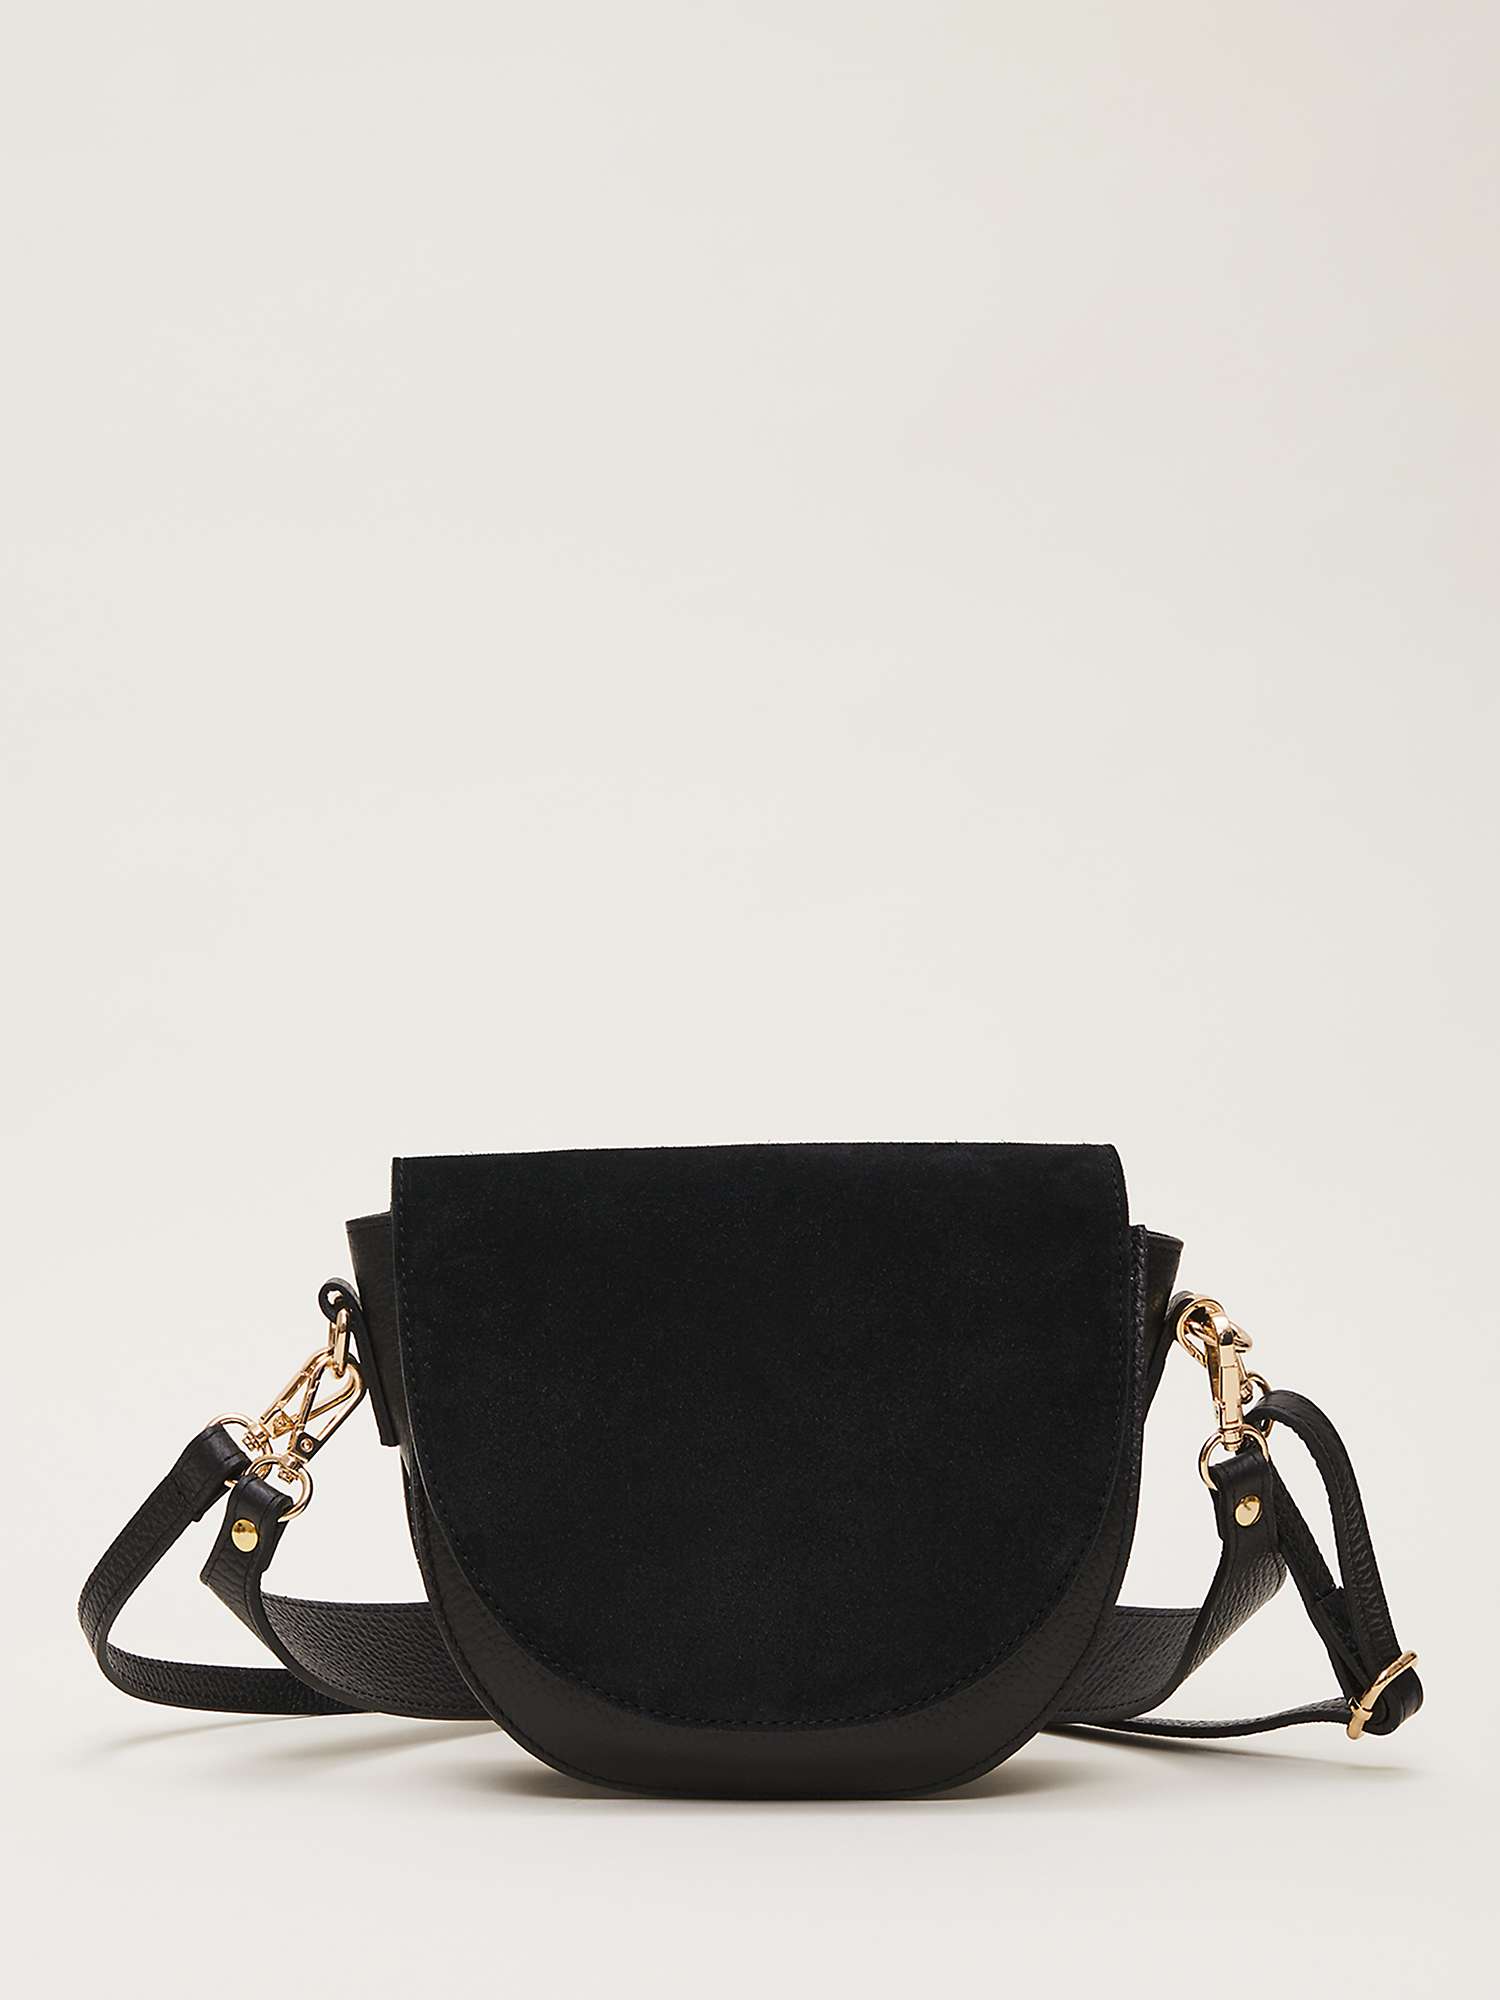 Buy Phase Eight Suede Cross Body Bag, Black Online at johnlewis.com